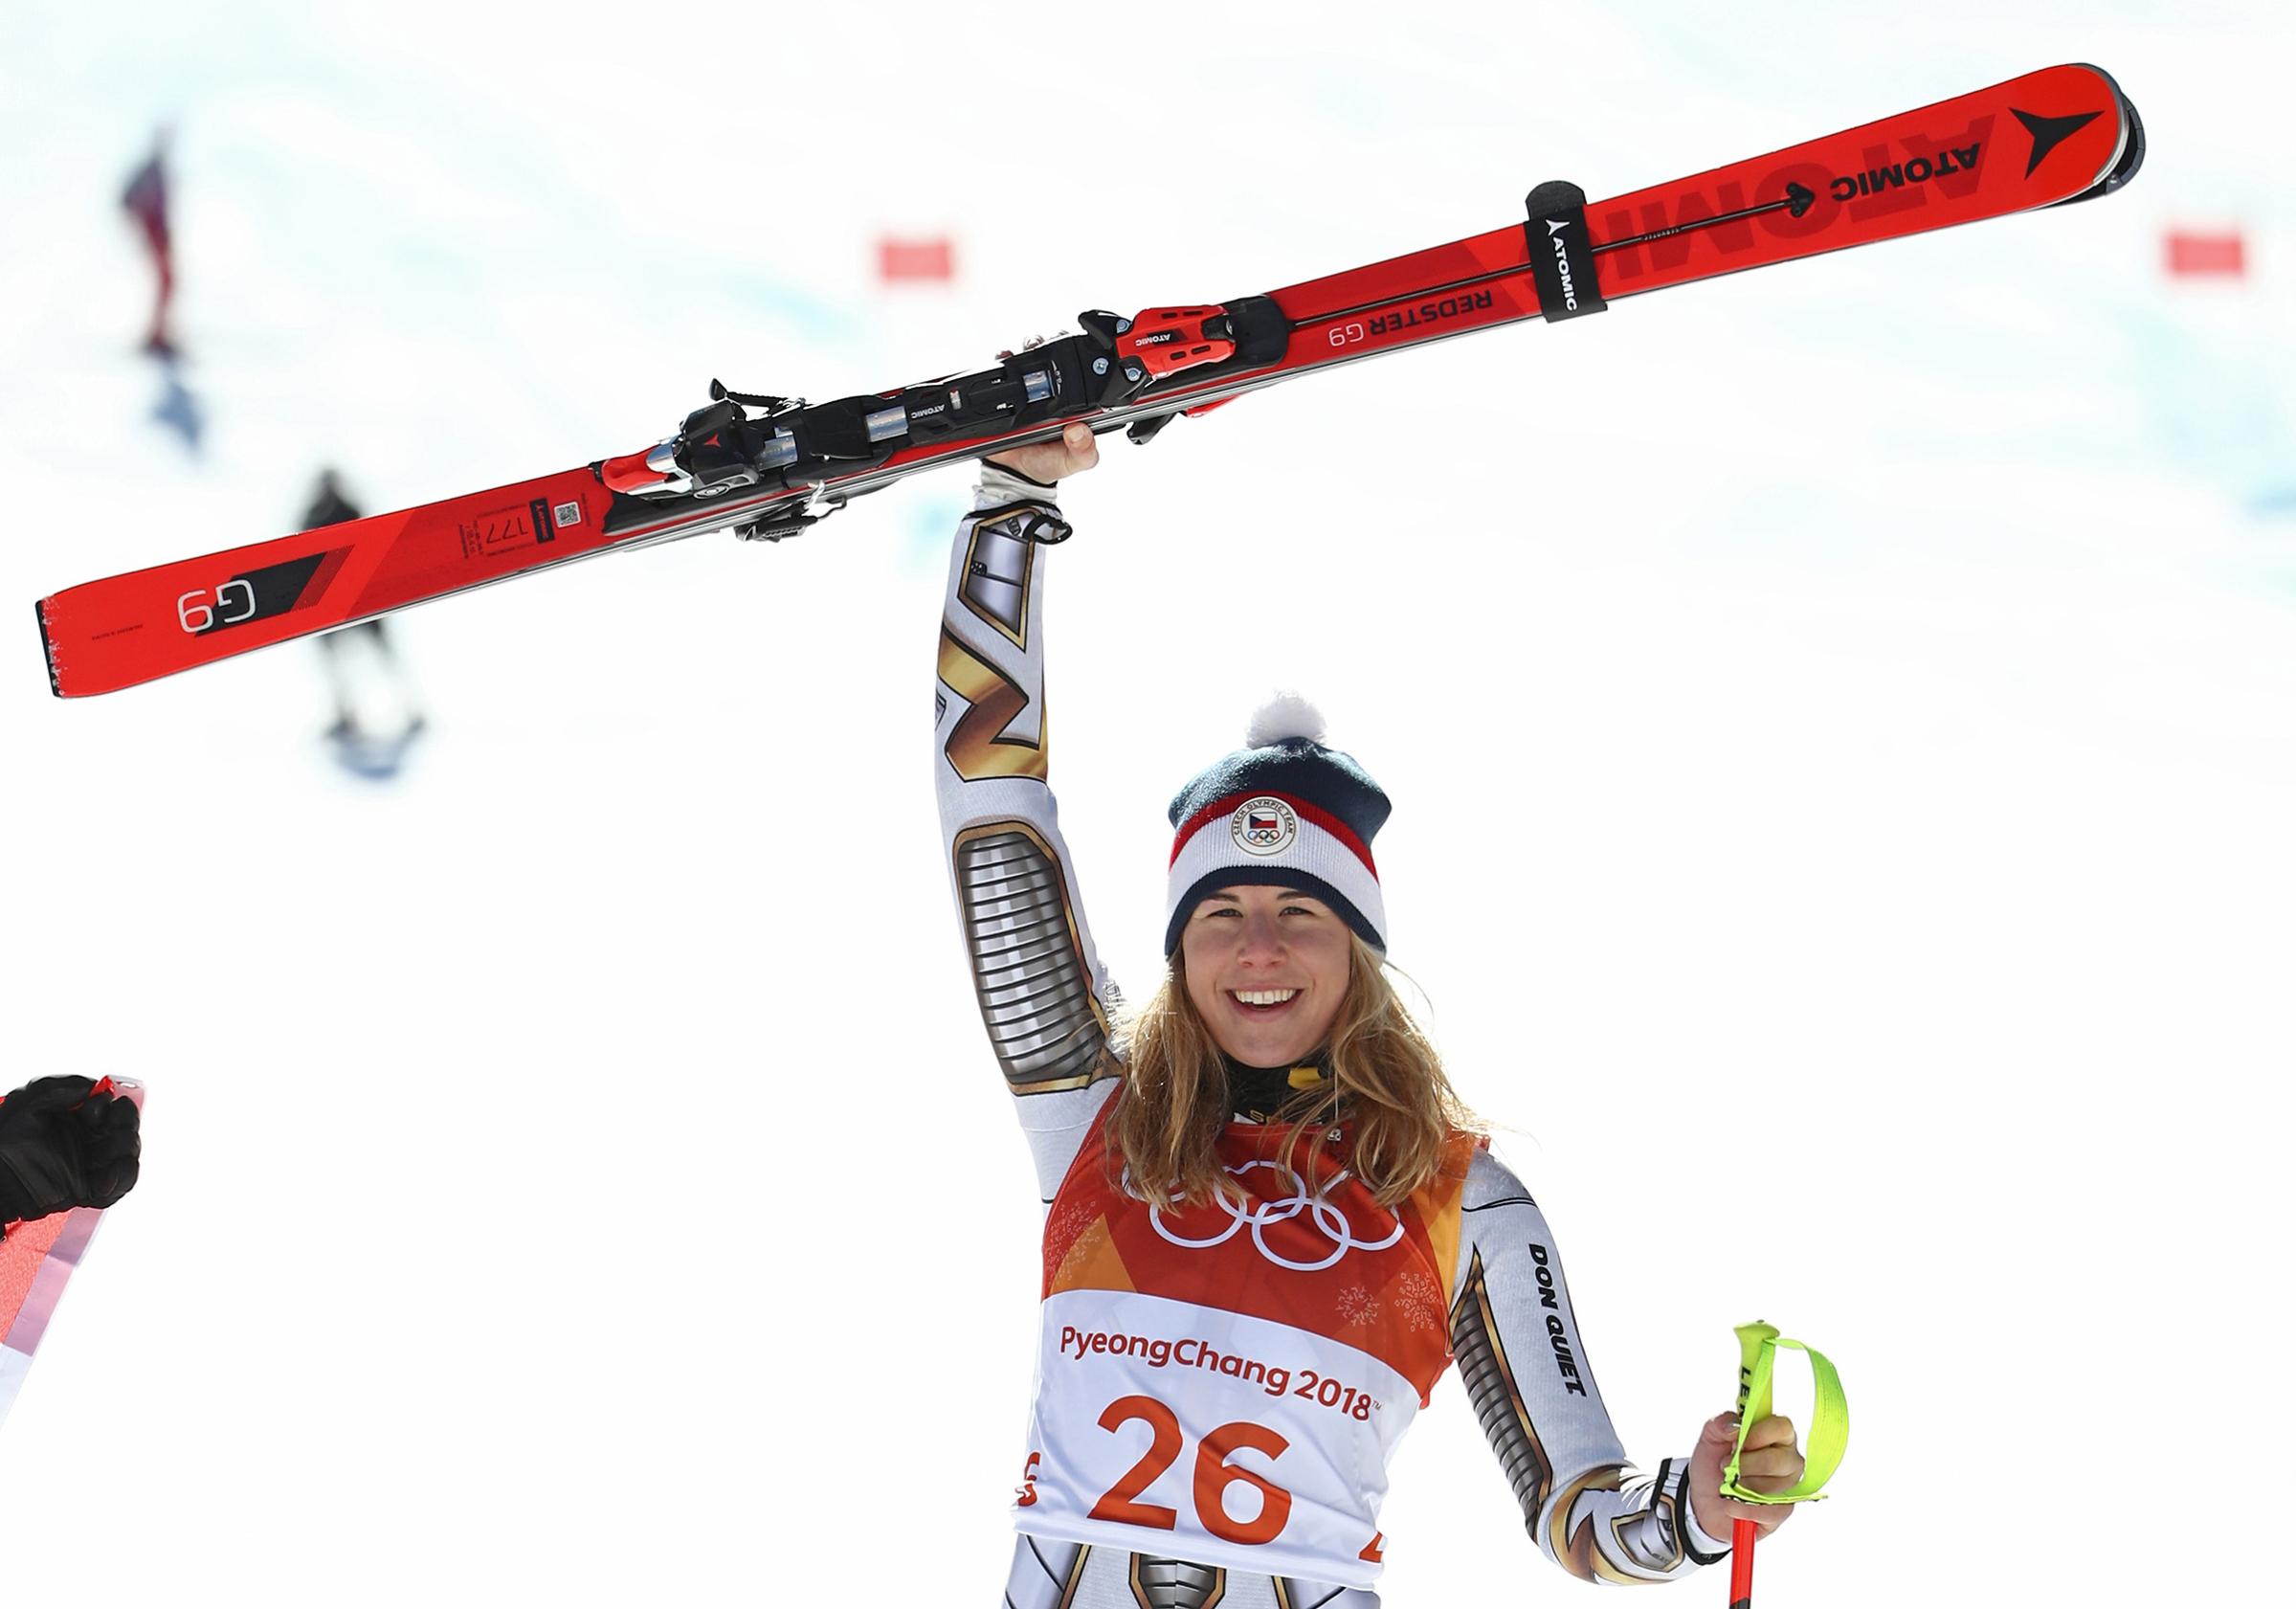 Gold medallist Ester Ledecka of the Czech Republic celebrates during the victory ceremony for the Alpine Skiing Ladies Super-G at the PyeongChang 2018 Winter Olympic Games on Feb. 17, 2018.